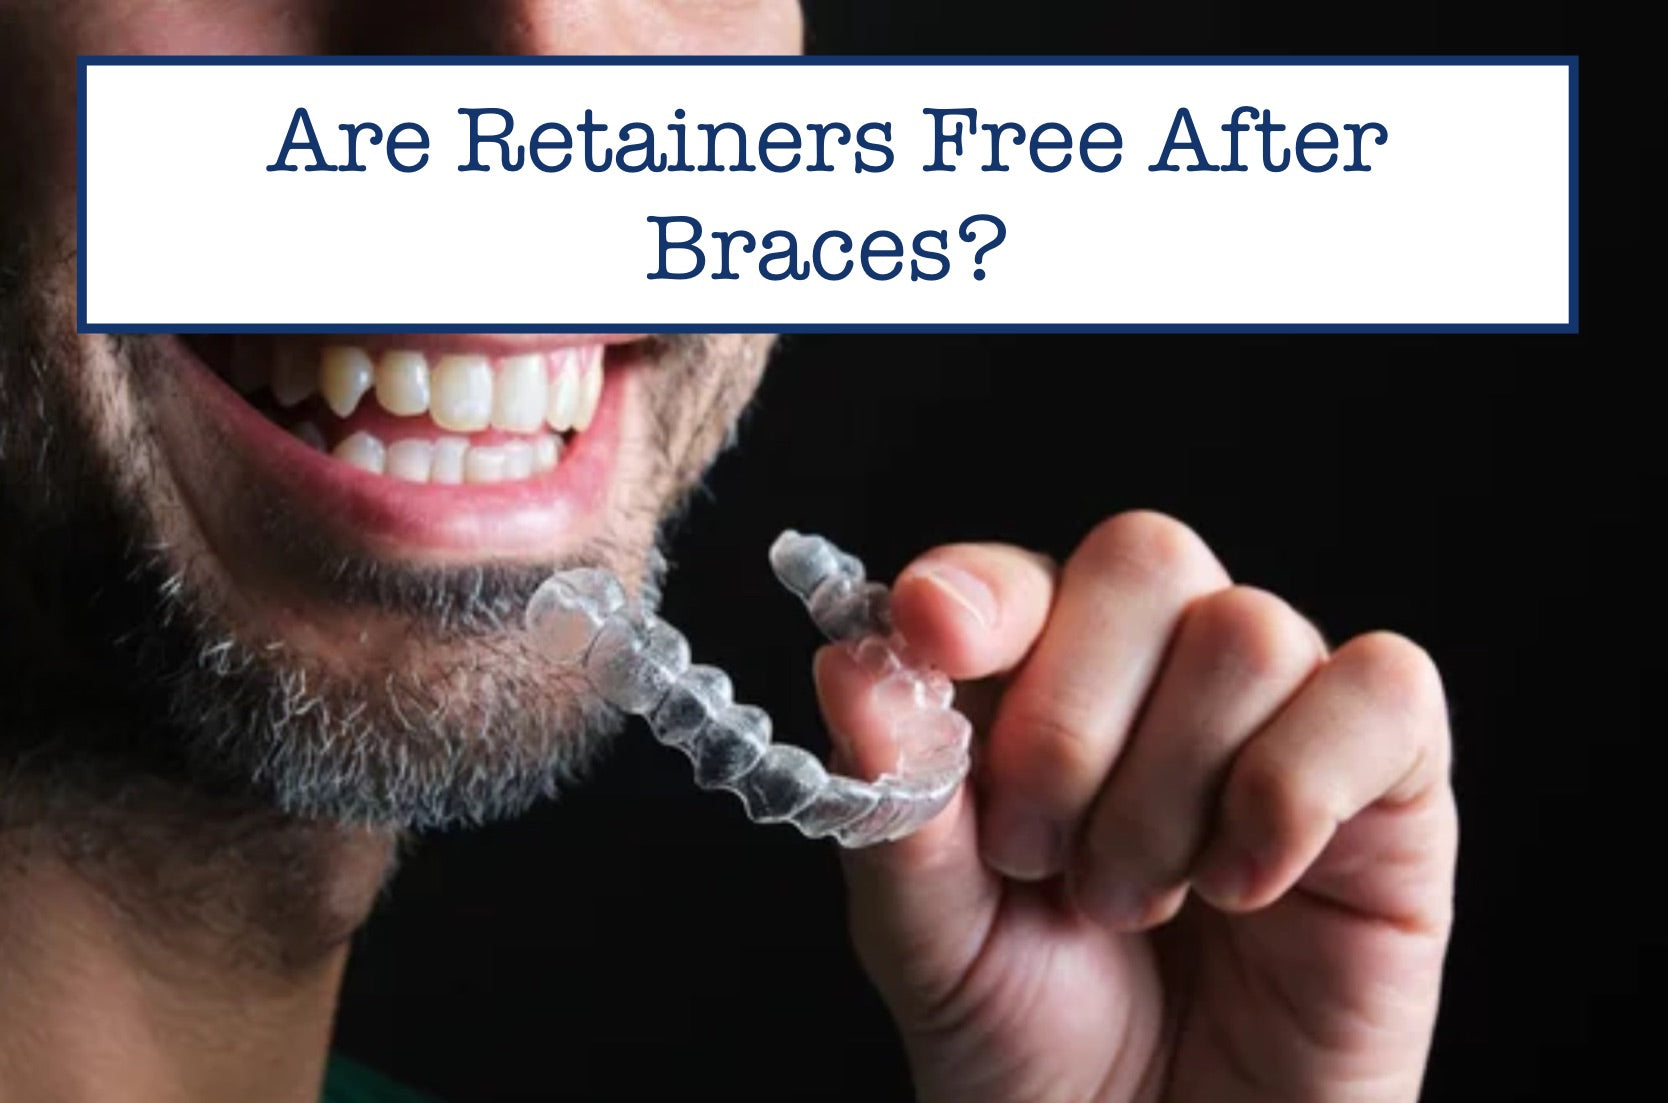 Are Retainers Free After Braces?